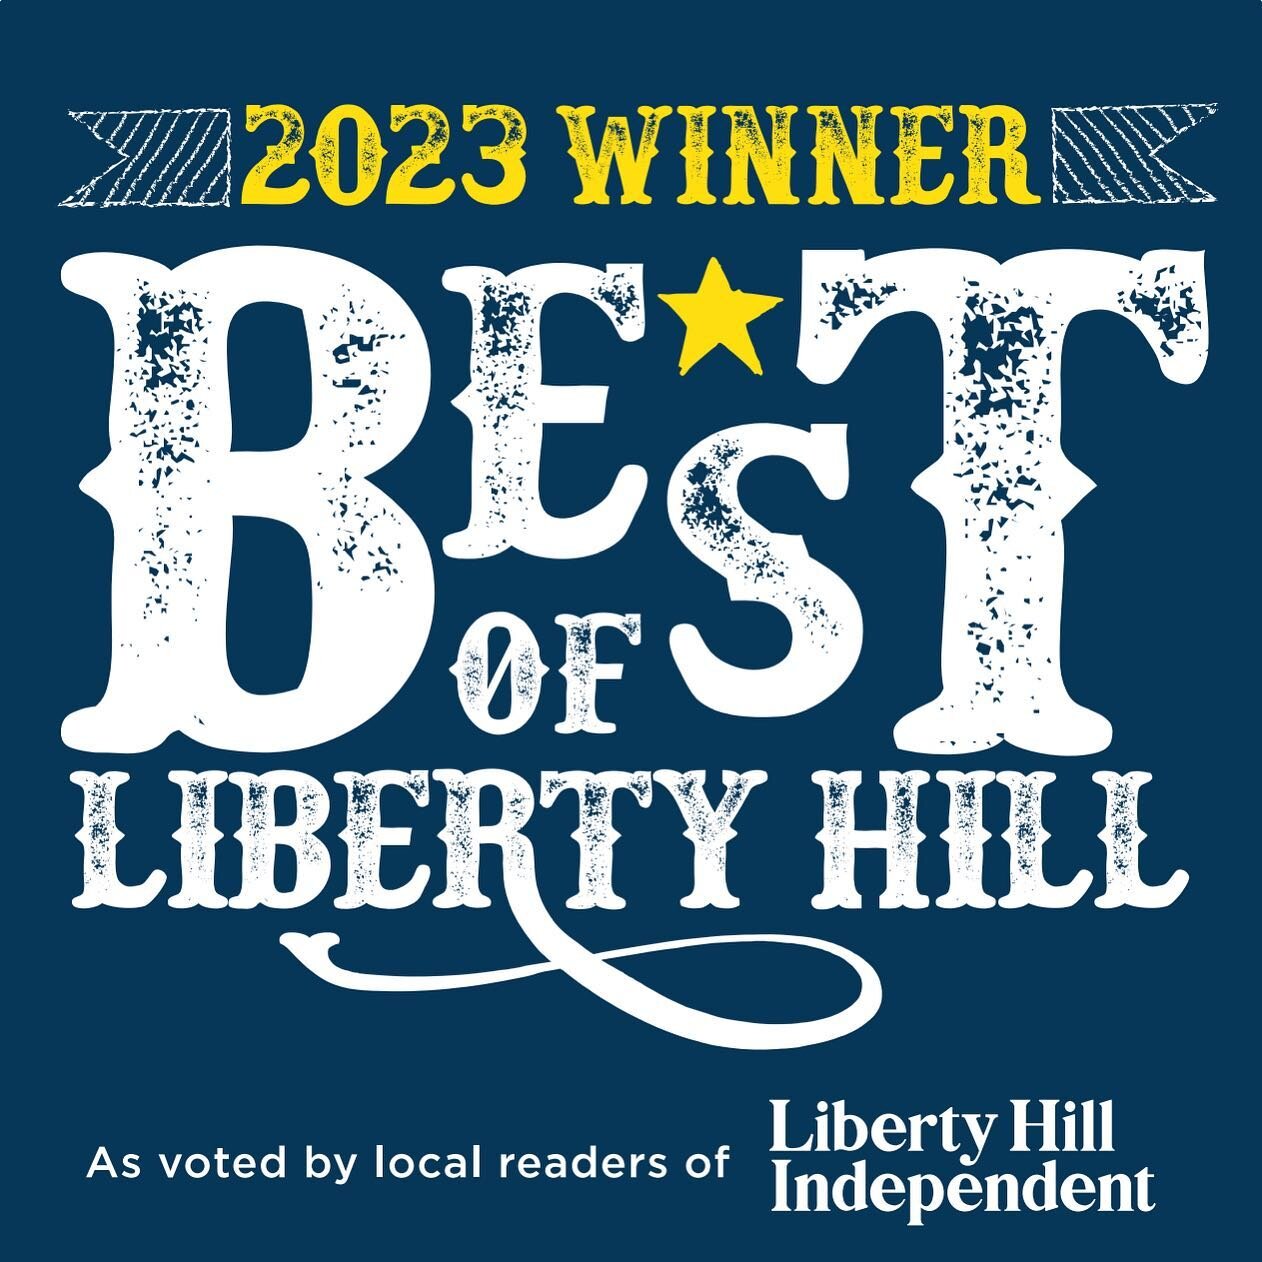 Wow!  We love you, Liberty Hill!

Thank you for voting us best pool builder! 
As a #LibertyHill based business, it means so much to be recognized with this honor among our neighbors and friends. 

#CustomPoolBuilder
#CustomPoolsandSpas
#LibertyHillCu